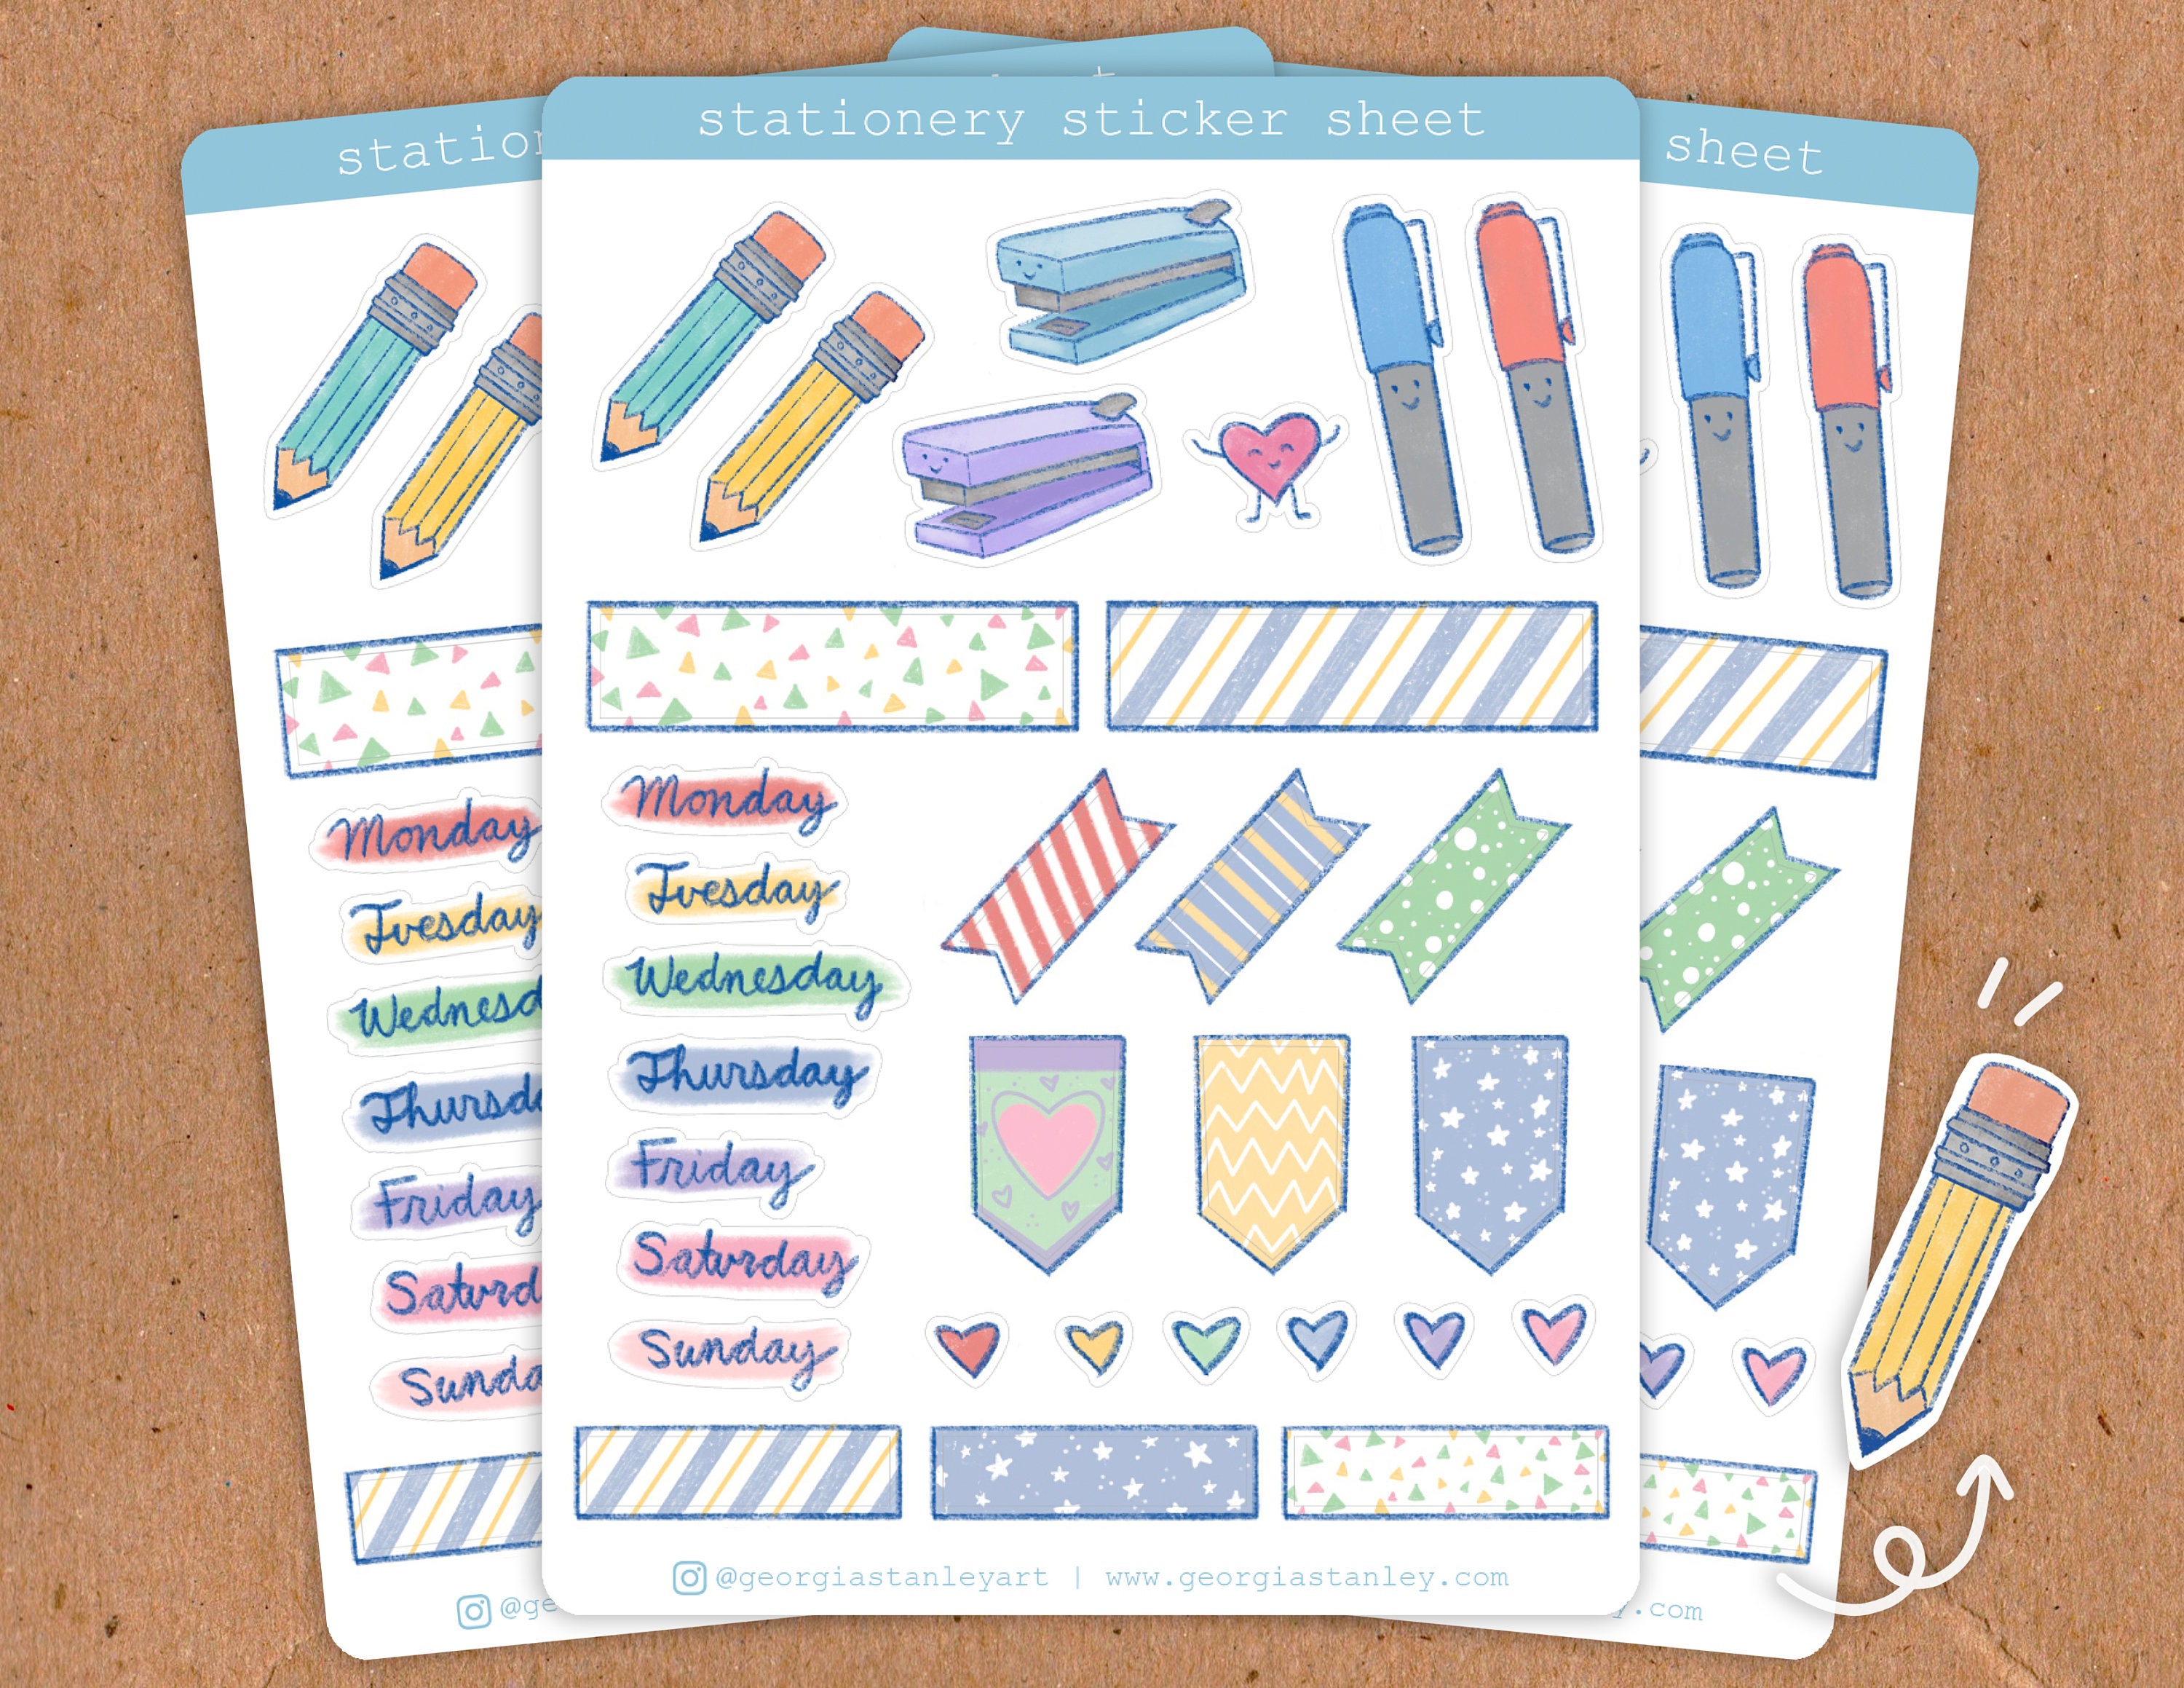 Stationery Sticker Sheet Illustrated Stickers for Planners